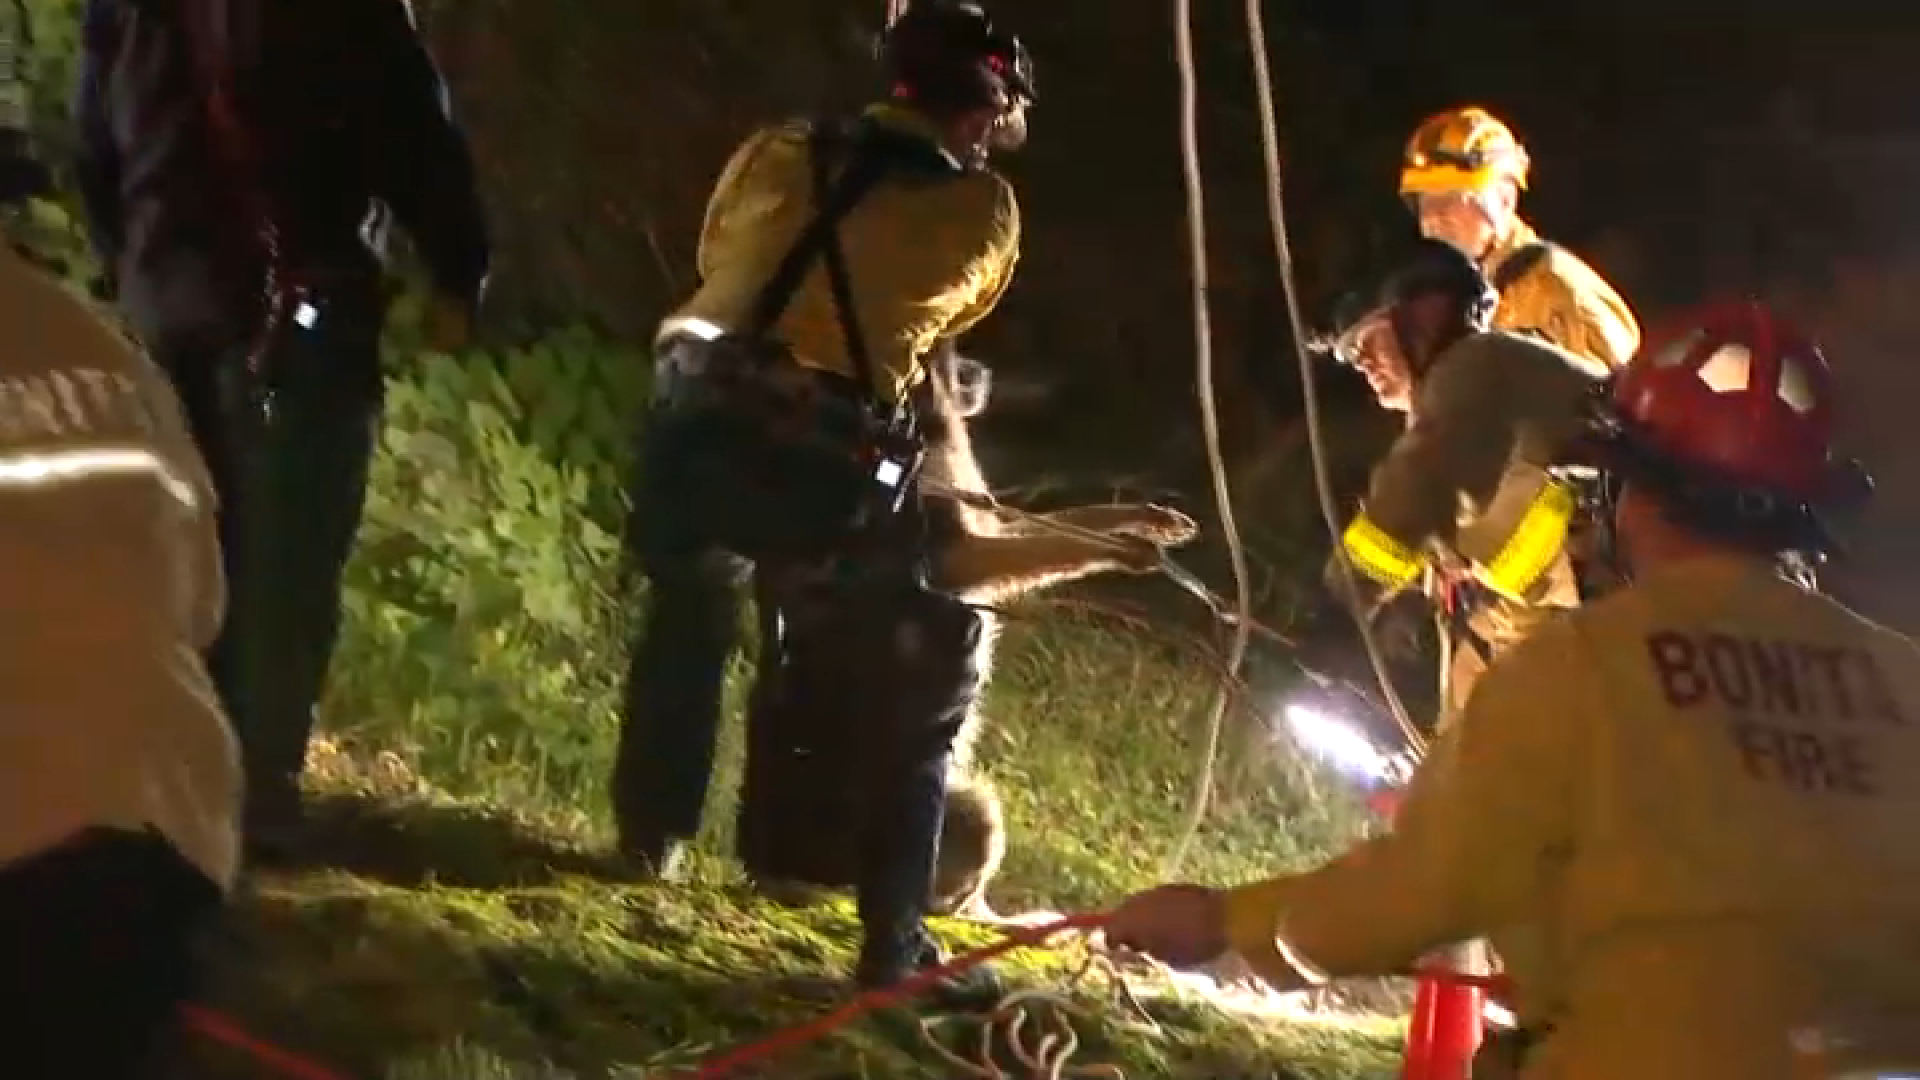 WATCH: Firefighters Rescue German Shepherd That Fell Down 30-Foot Hole in  South Bay – NBC 7 San Diego